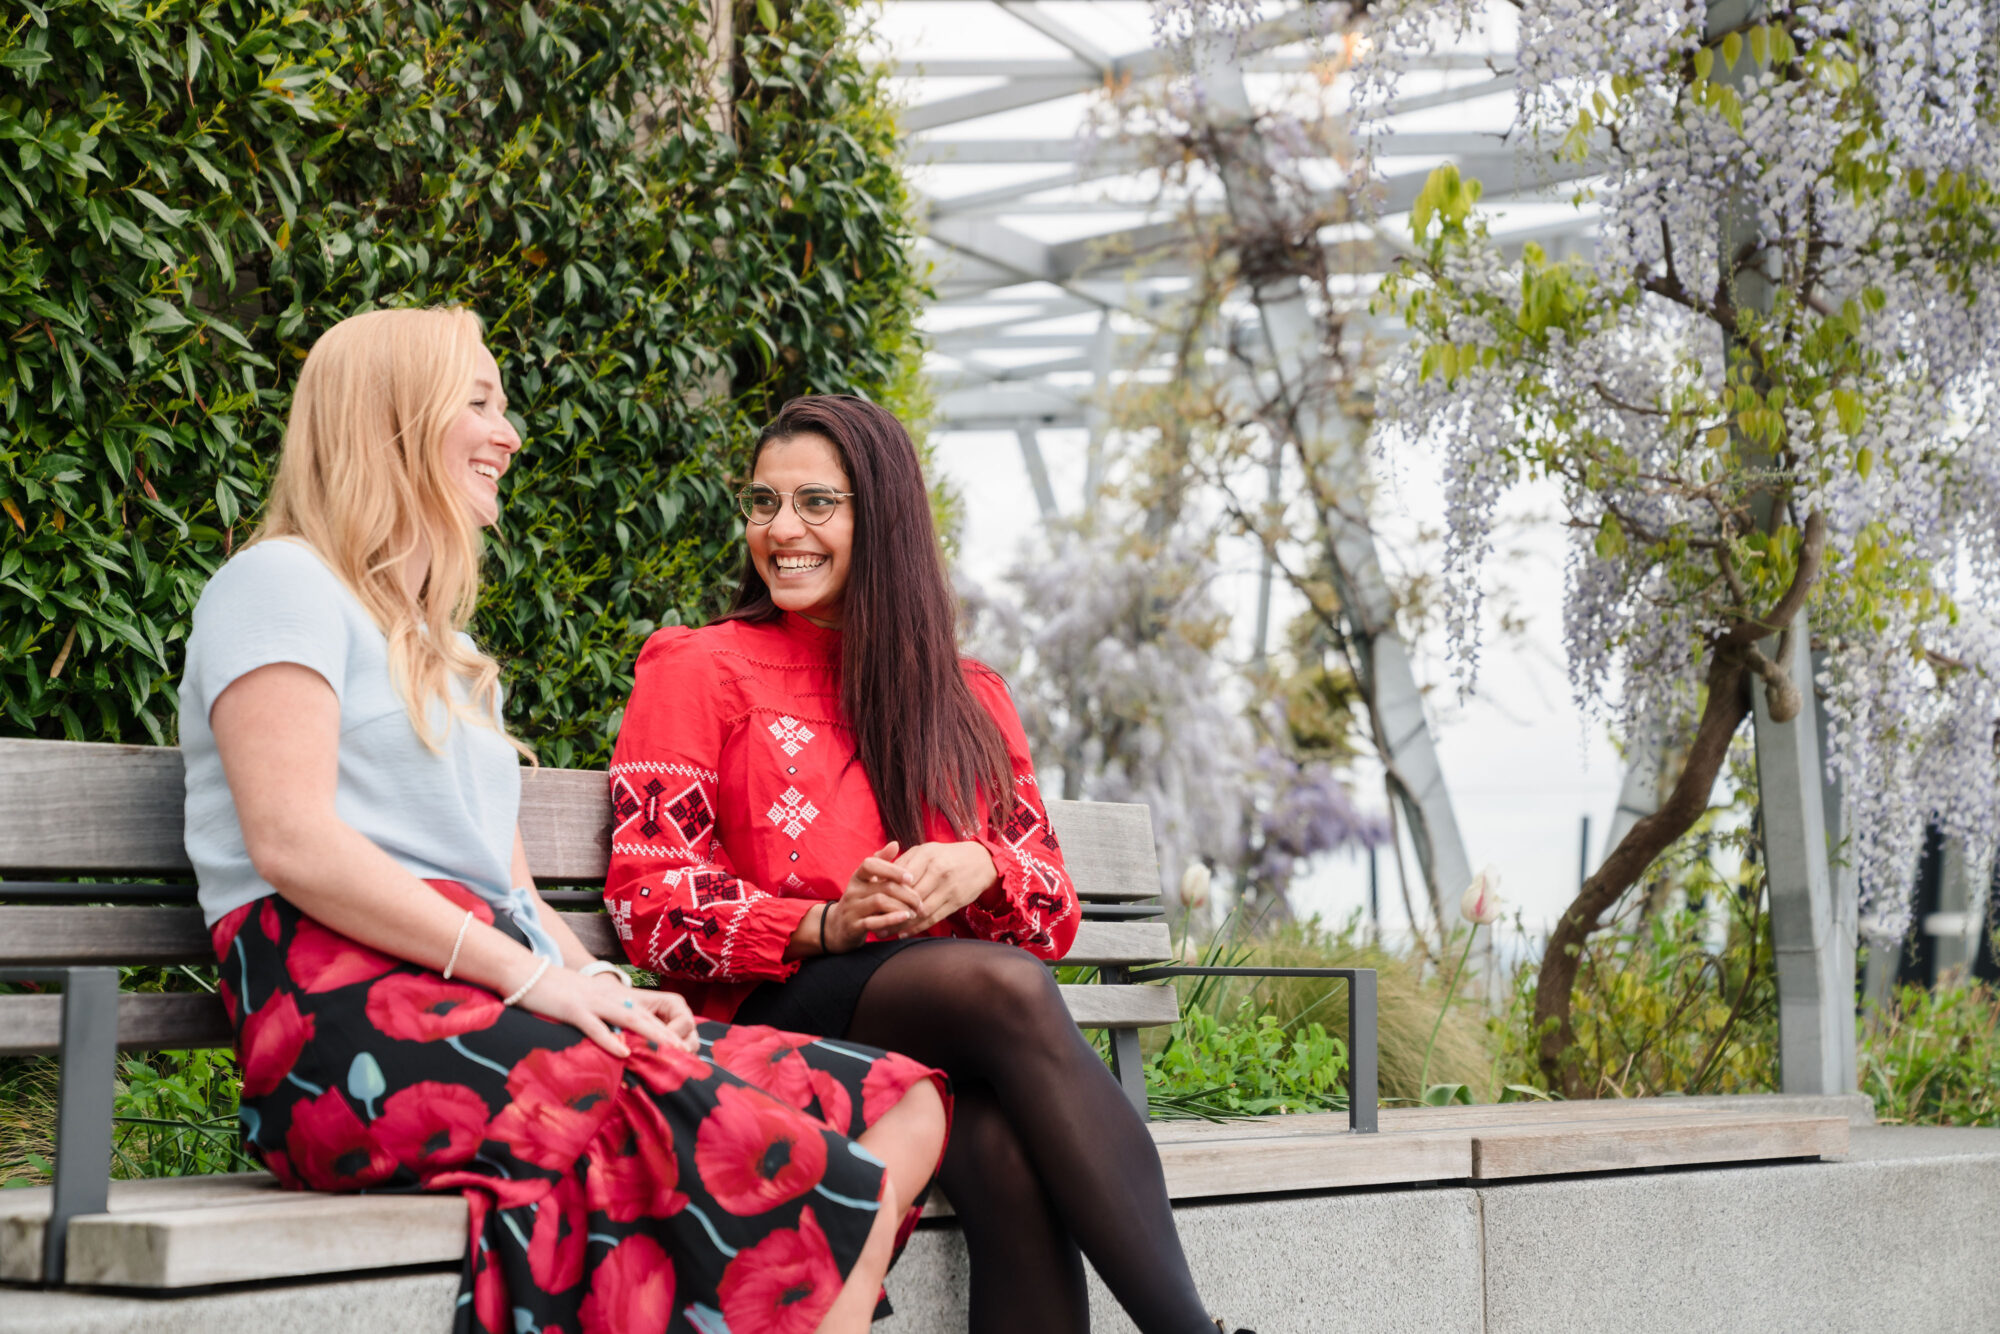 Visiting | City of London - 120 Fenchurch Street - two women sat on a bench in the garden